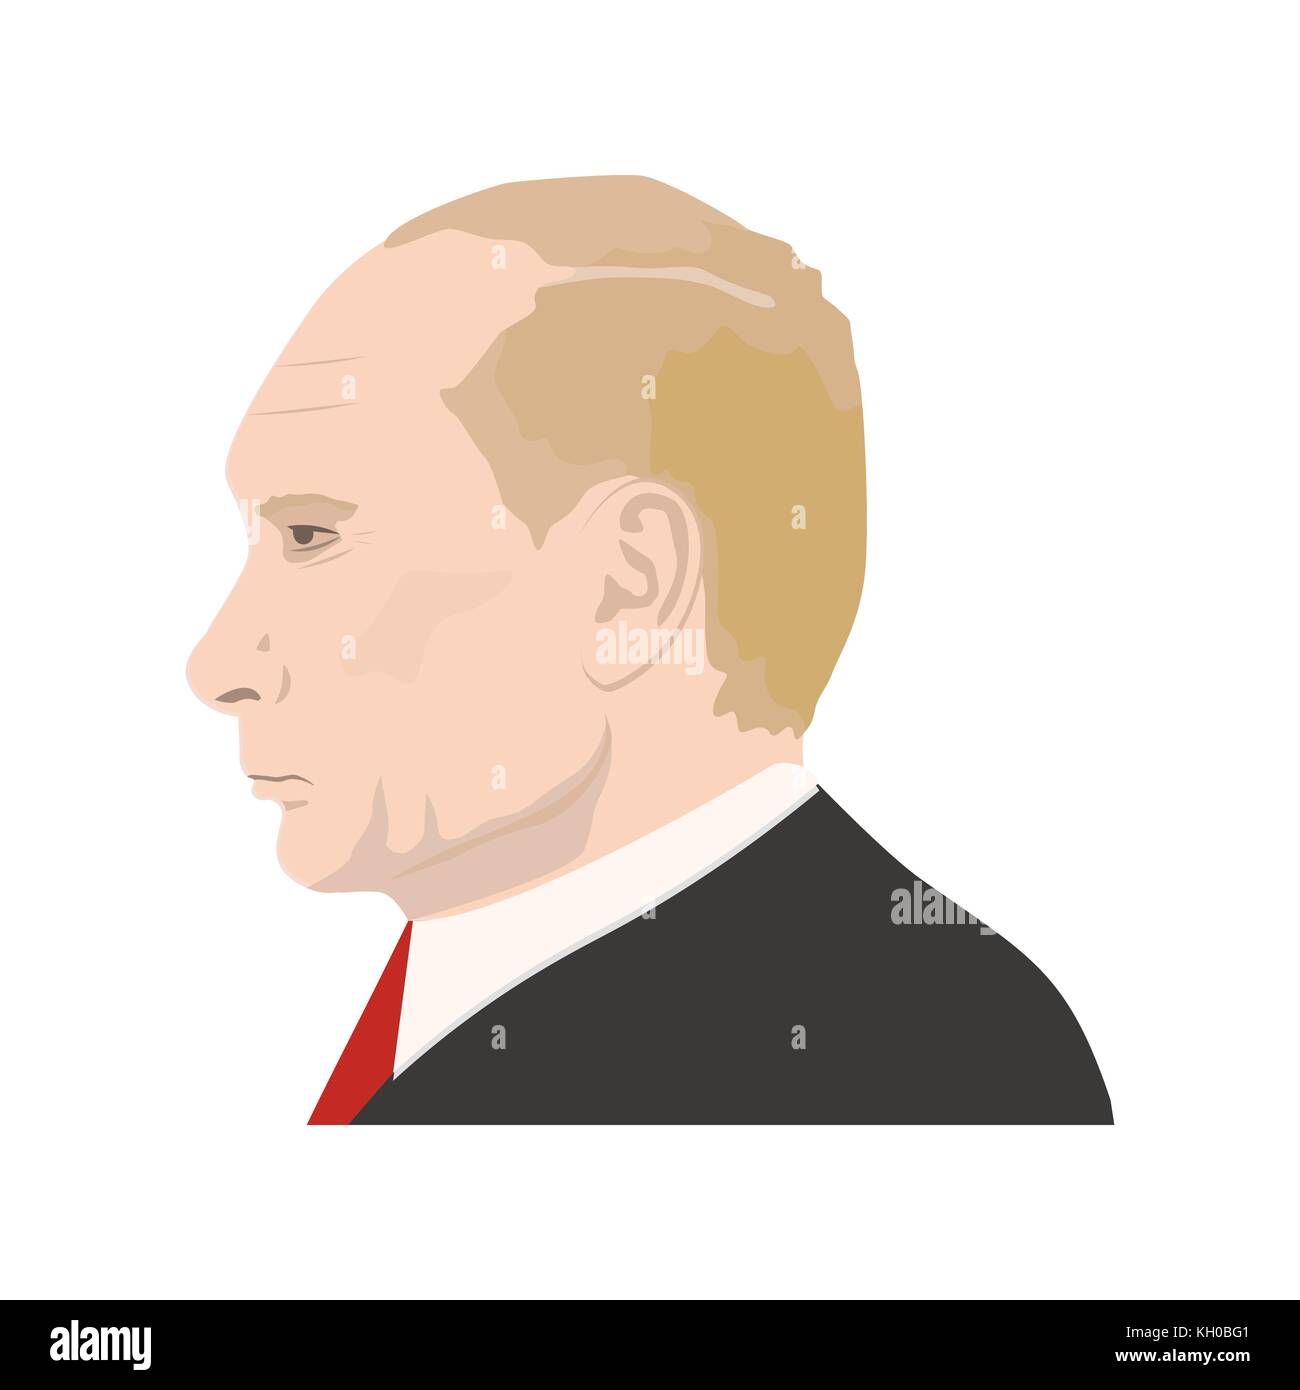 November 11, 2017 Editorial illustration of a portrait of the President of Russia Fedaration Vladimir Putin on isolated background Stock Vector